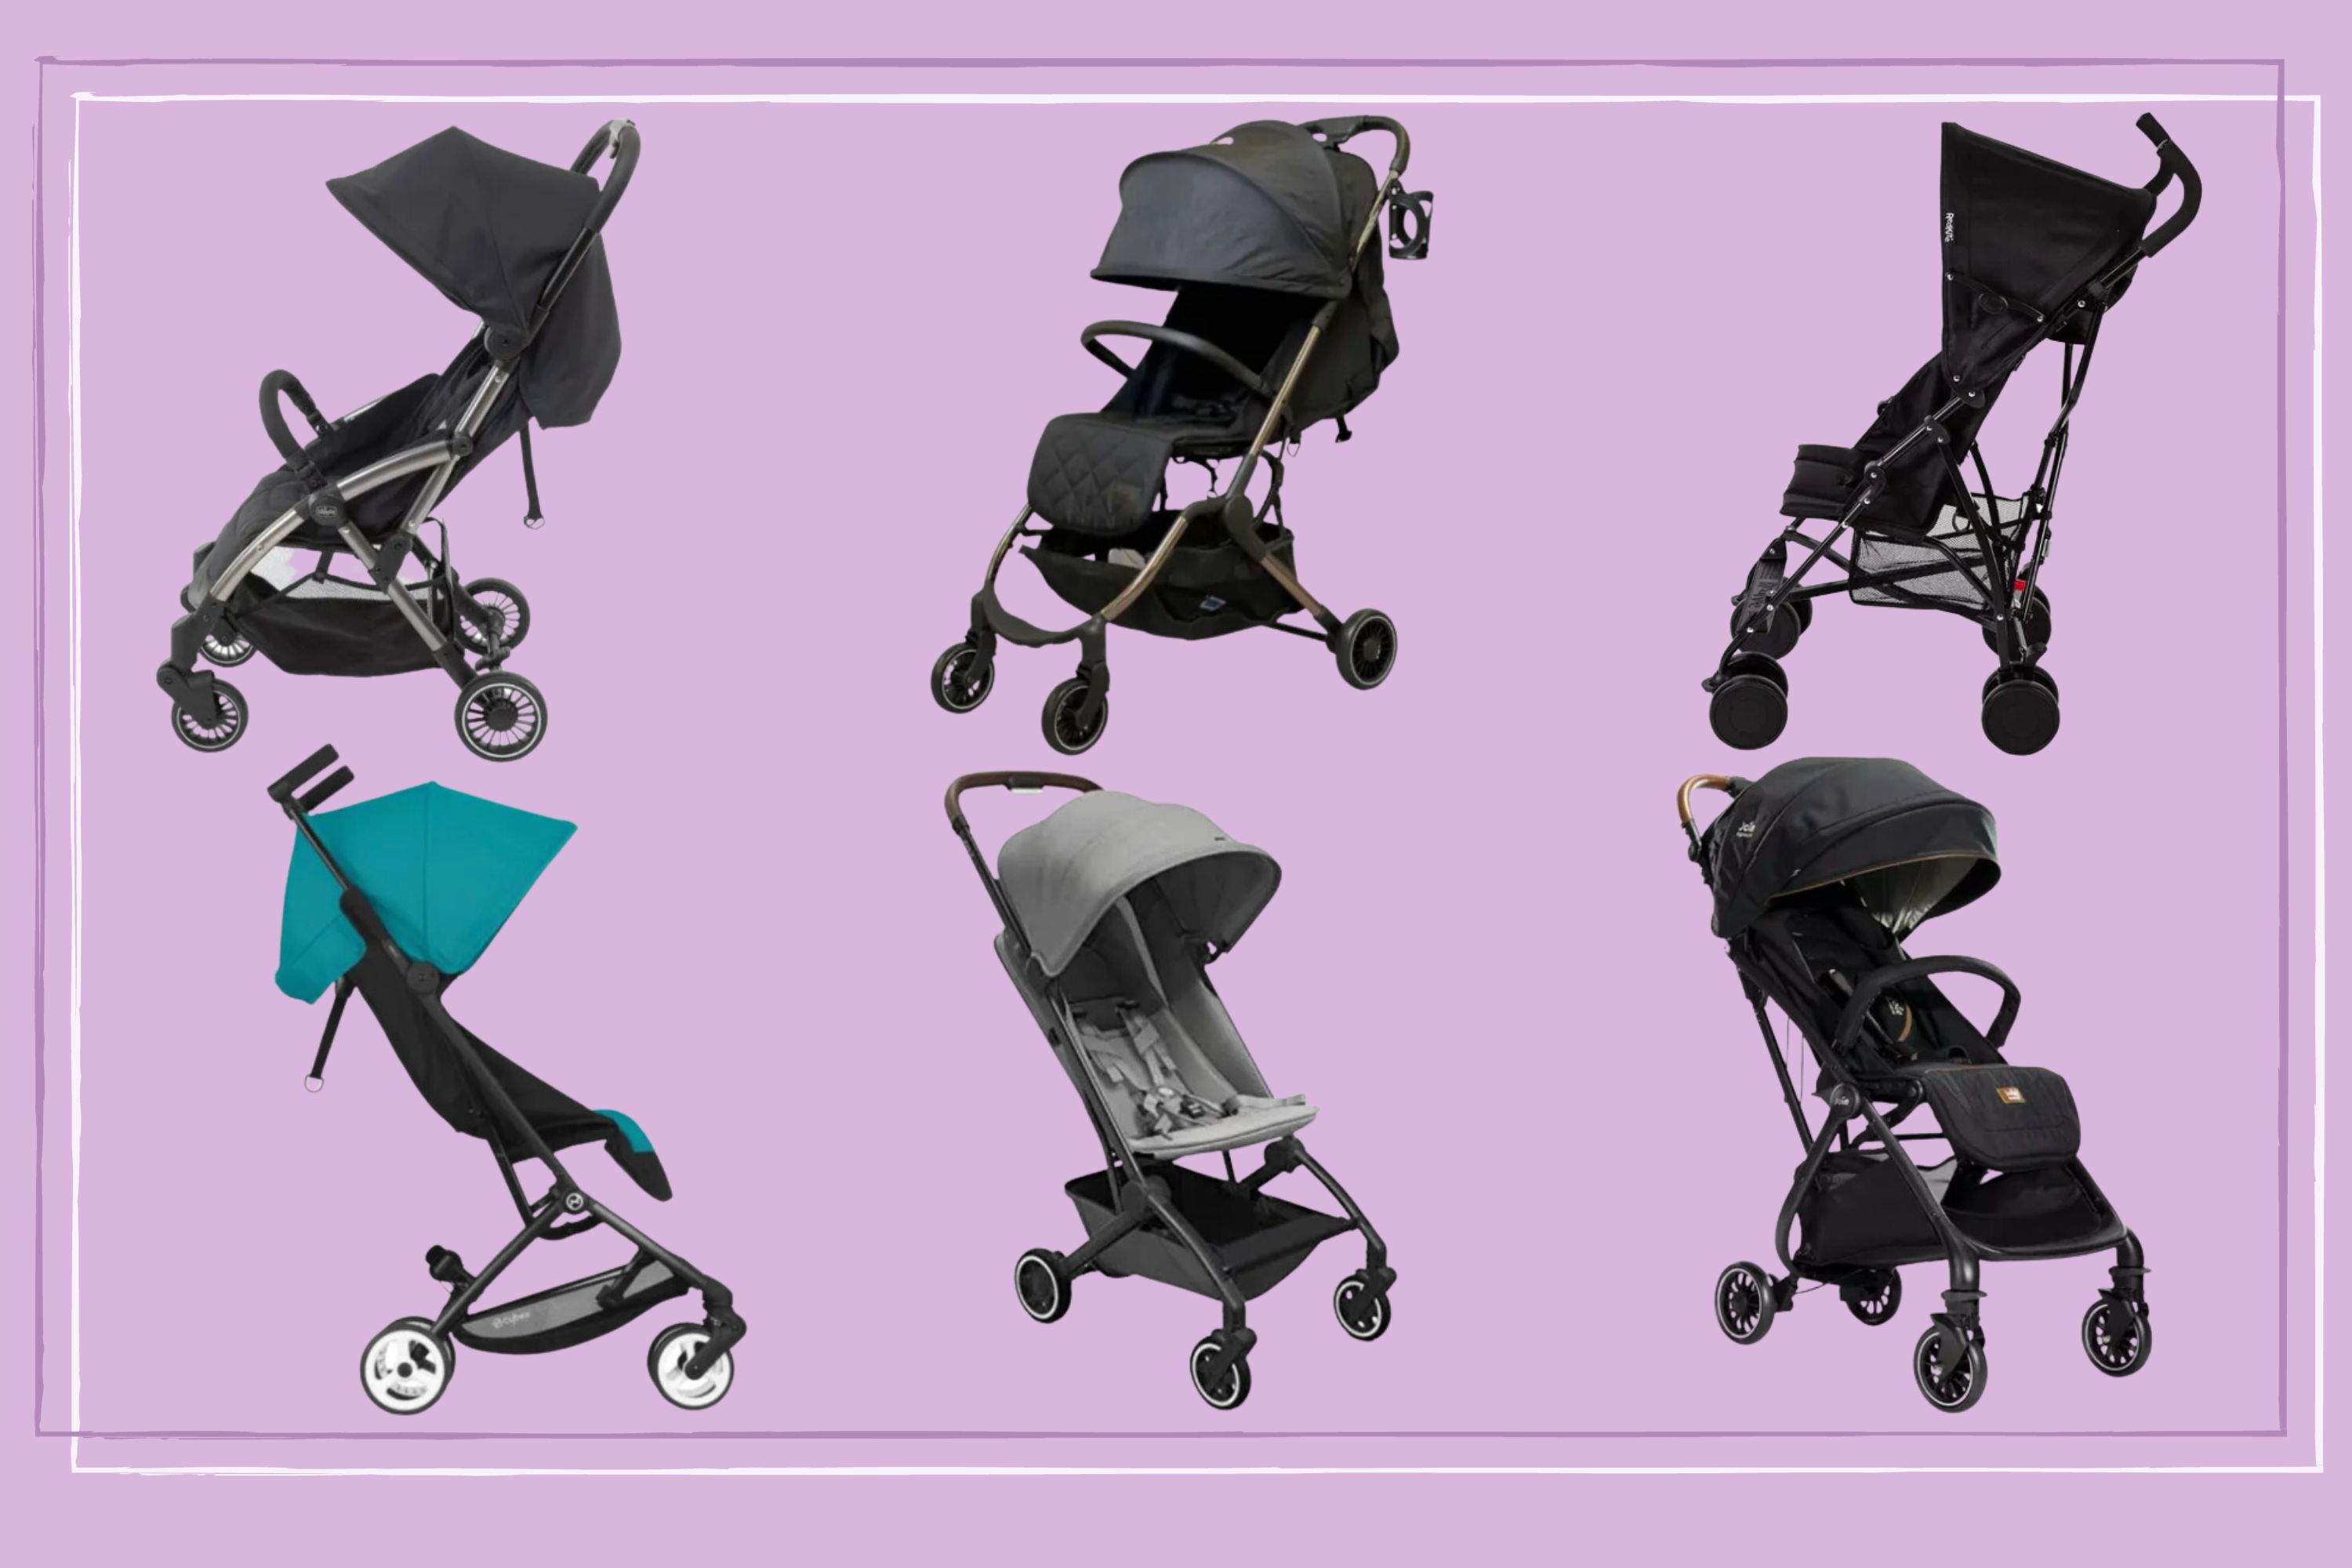 The Libelle Stroller, As the lightest ultra-compact stroller in the line,  the CYBEX Libelle is designed for everyday adventures. Its lean frame folds  into a space-saving, By CYBEX